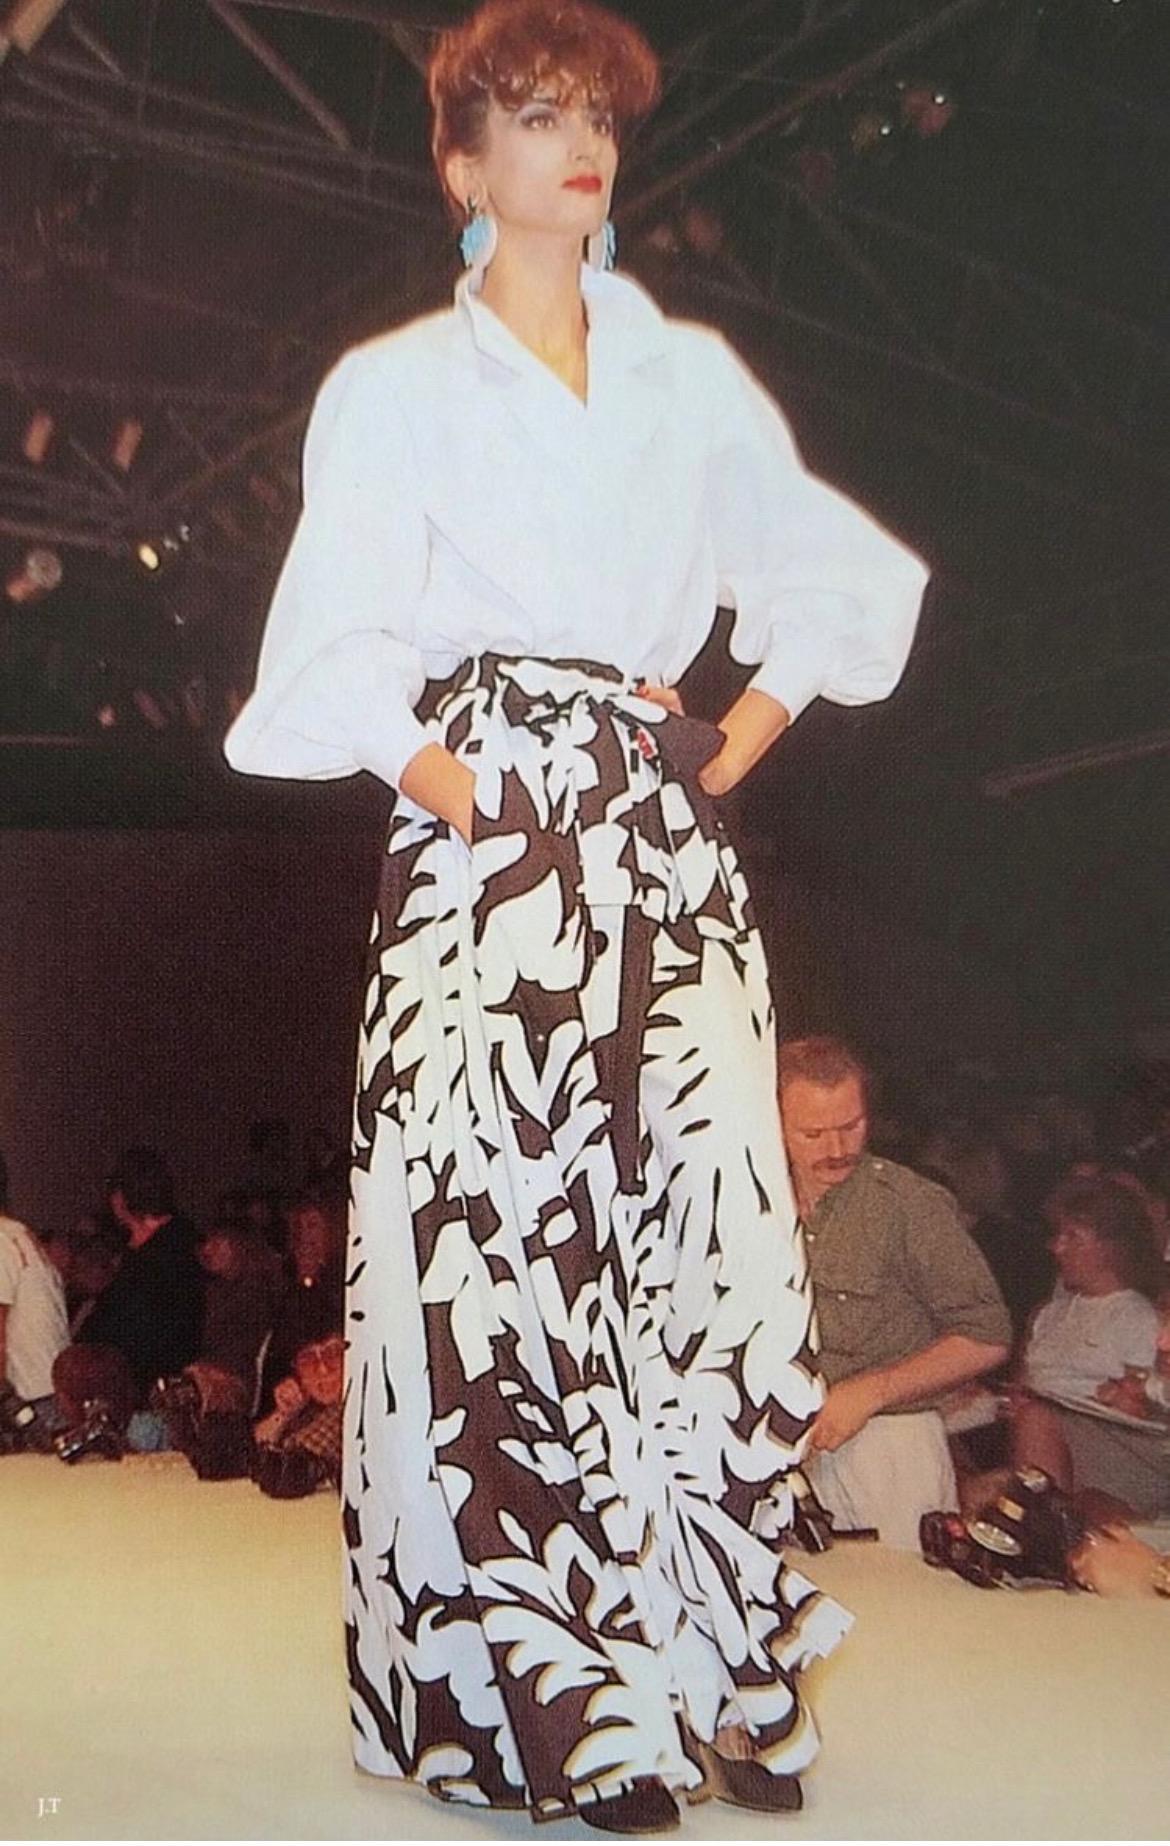 Presenting a black and white leaf print Saint Laurent Rive Gauche duster, designed by Yves Saint Laurent. From the Spring/Summer 1985 collection, this fabulous bold print debuted on the season's runway and was also used in the season's ad campaign.